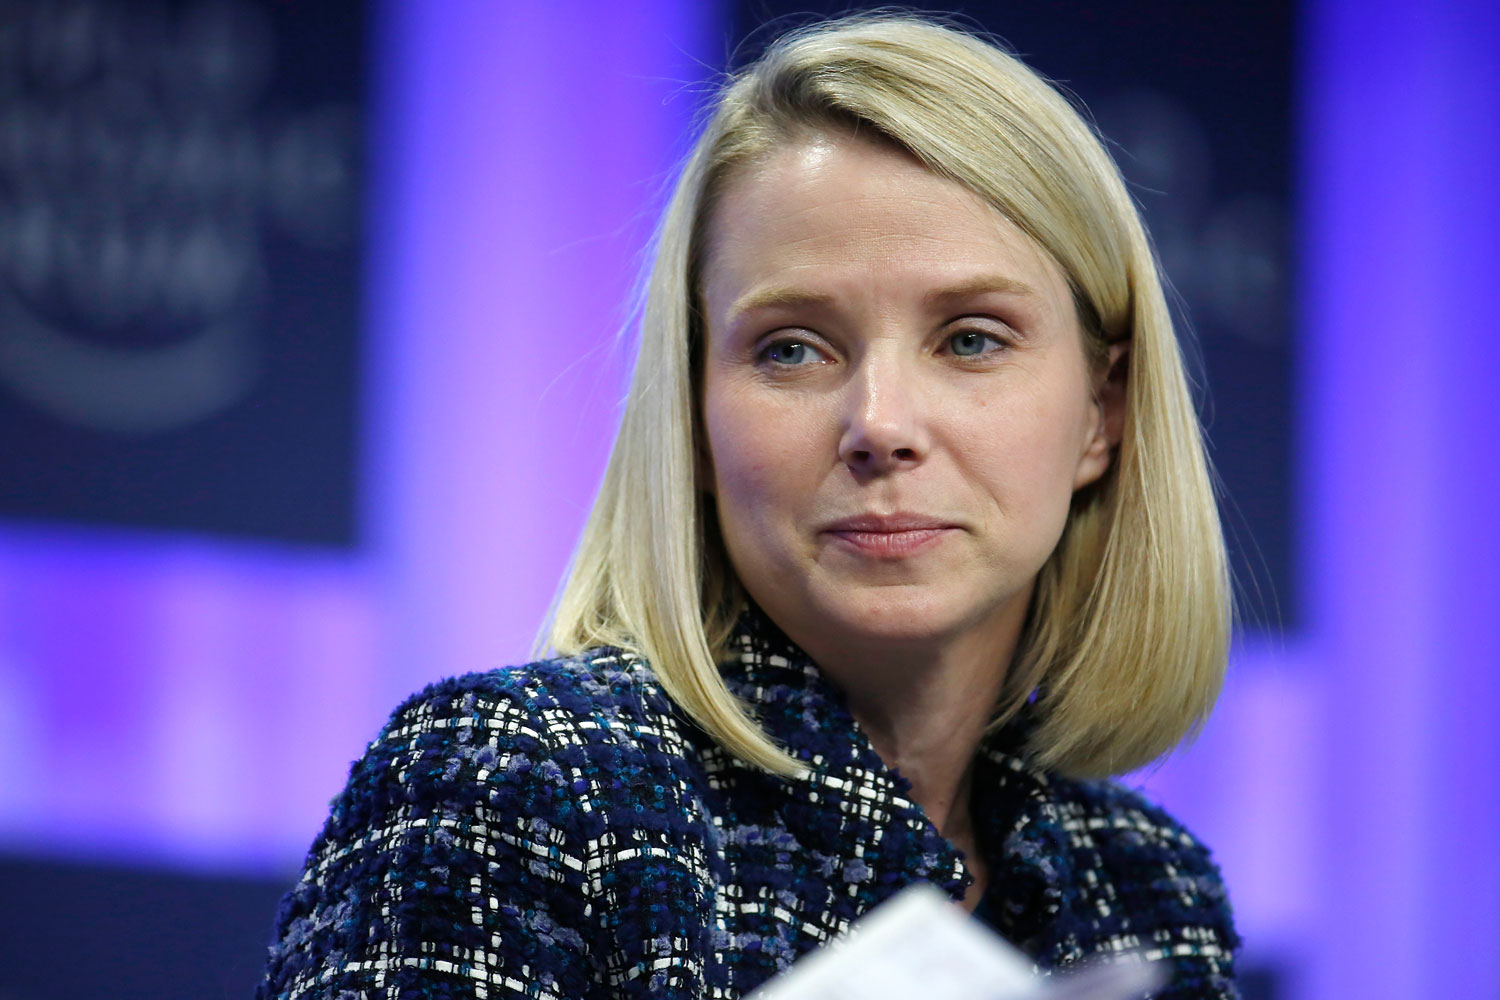 Marissa Mayer, chief executive officer of Yahoo! Inc., pauses during a panel session on day four of the World Economic Forum in Davos, Switzerland, on Saturday, Jan. 25, 2014.